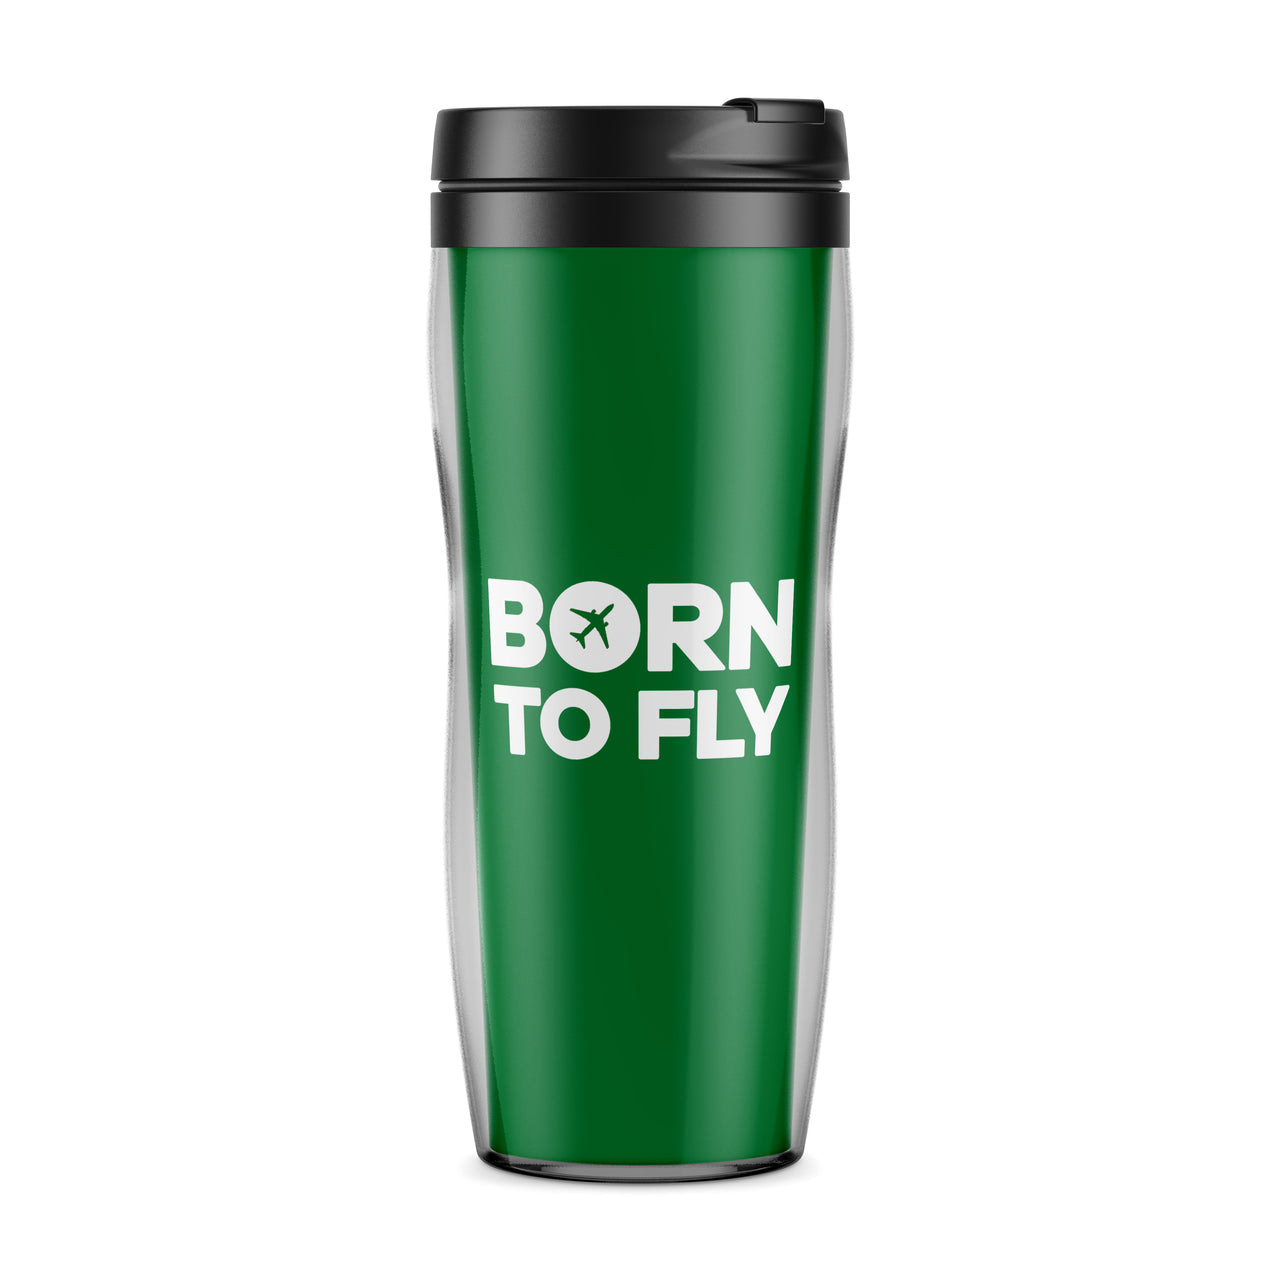 Born To Fly Special Designed Travel Mugs